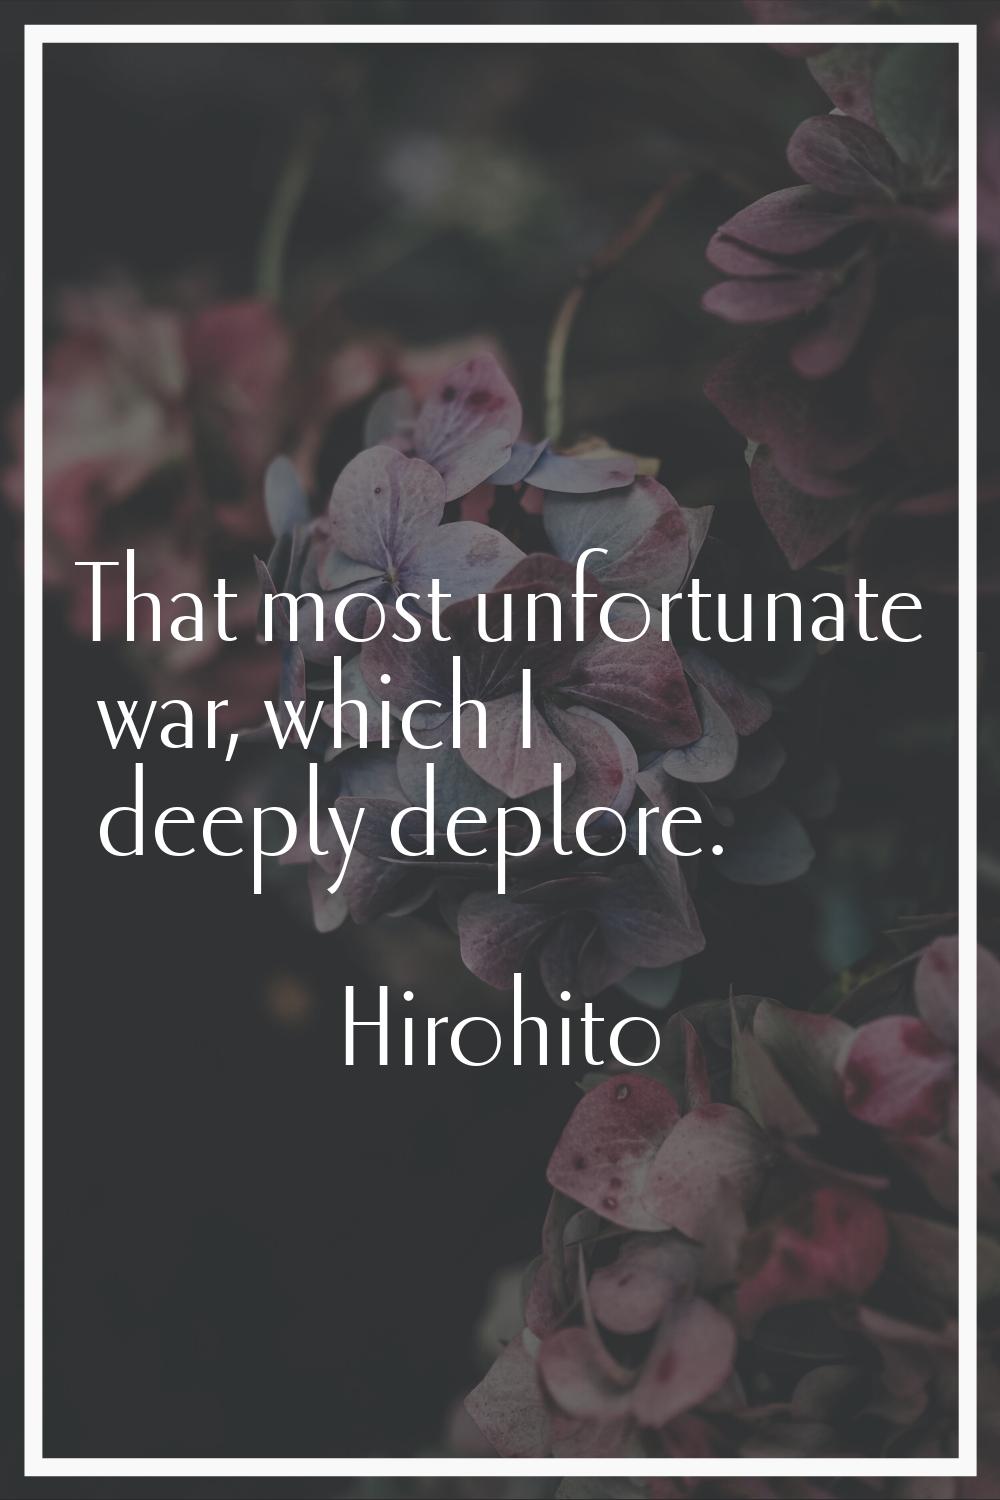 That most unfortunate war, which I deeply deplore.